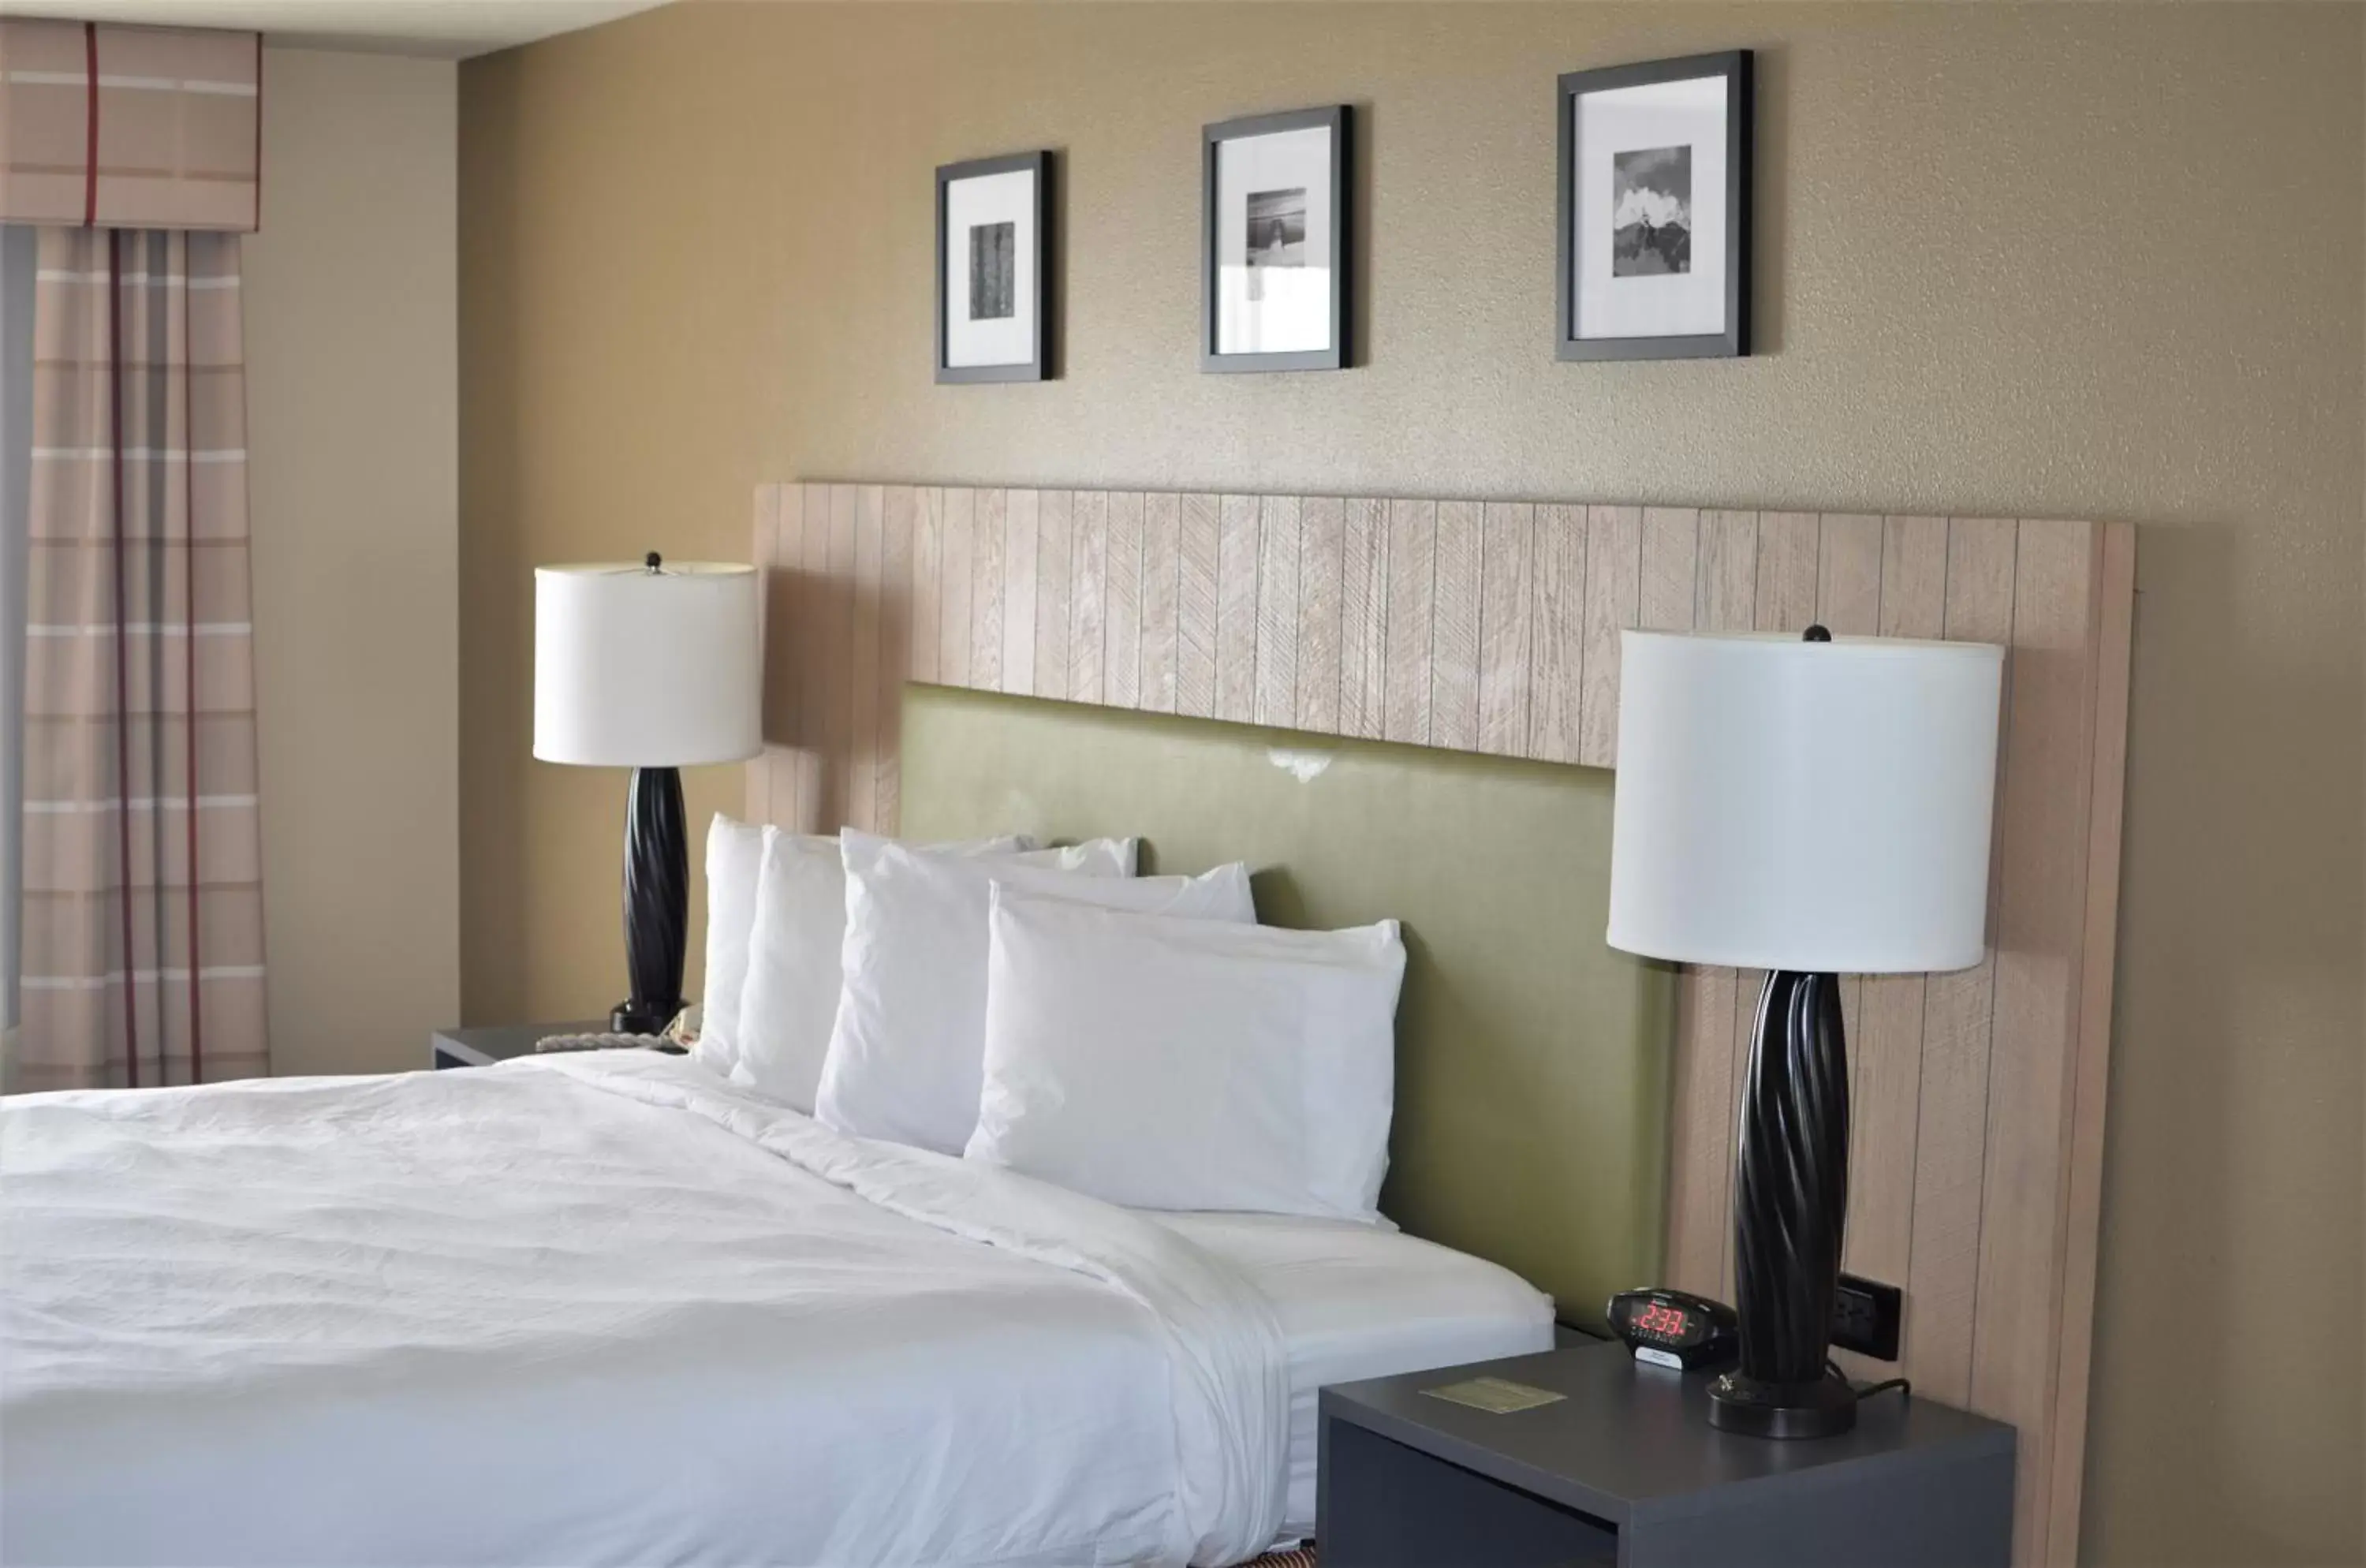 Bed in Country Inn & Suites by Radisson, West Valley City, UT